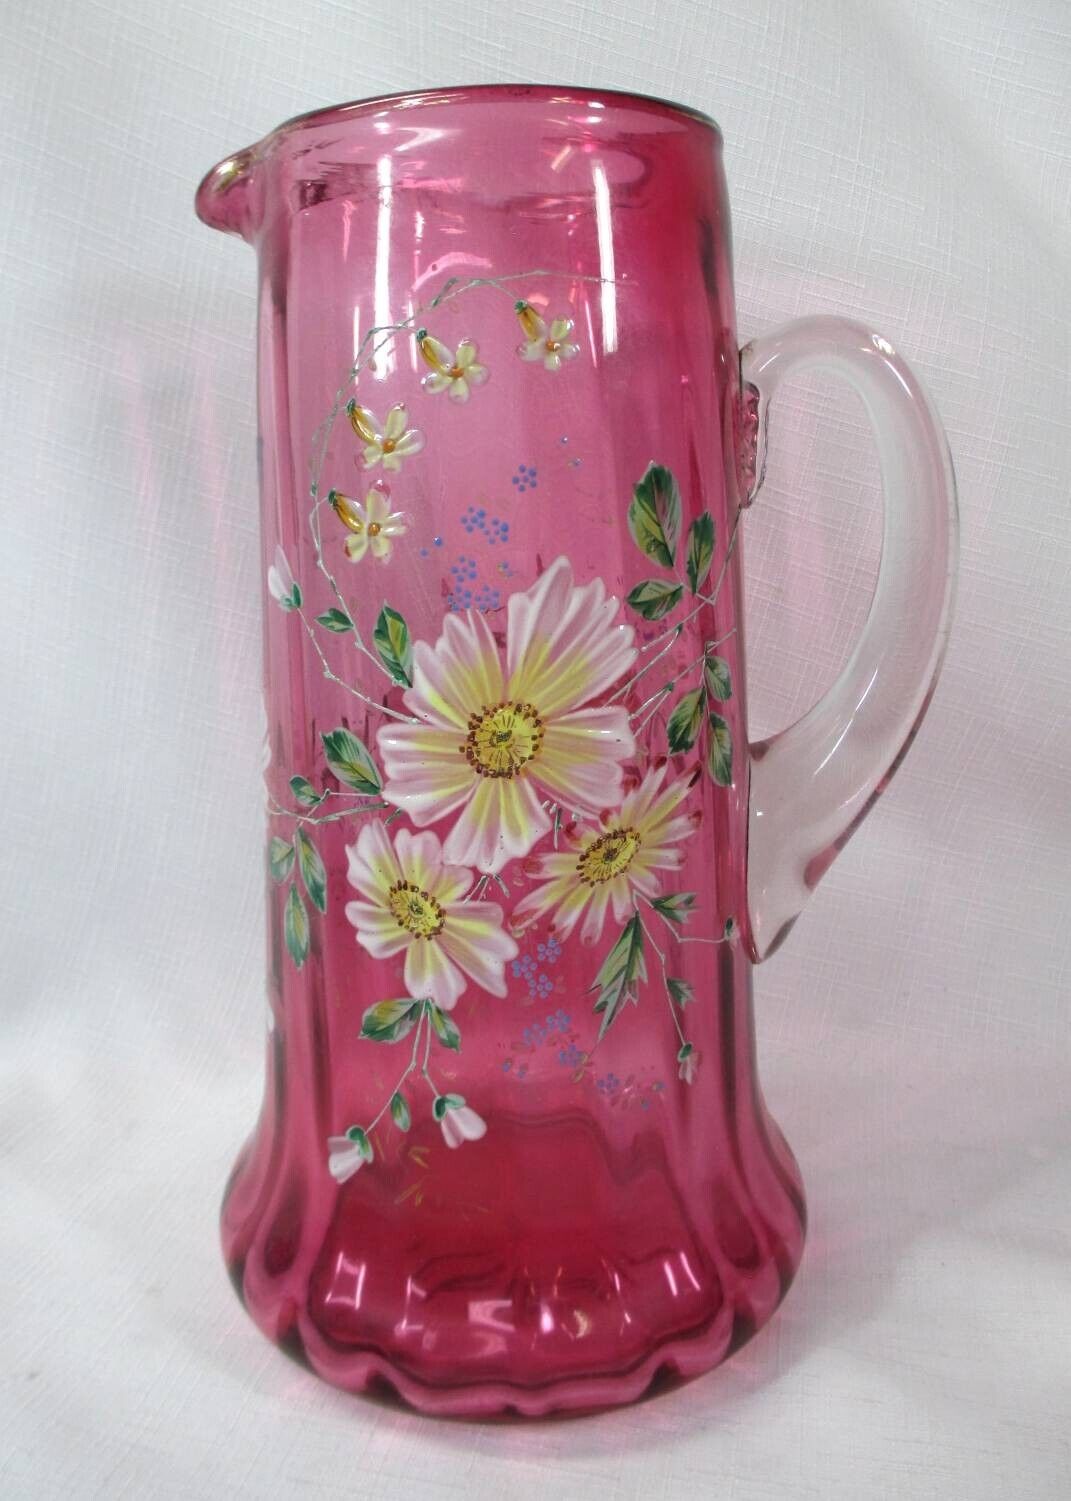 ANTIQUE ART GLASS TALL PITCHER W/ HAND-PAINTED FLOWERS & BUTTERFLY CLEAR HANDLE